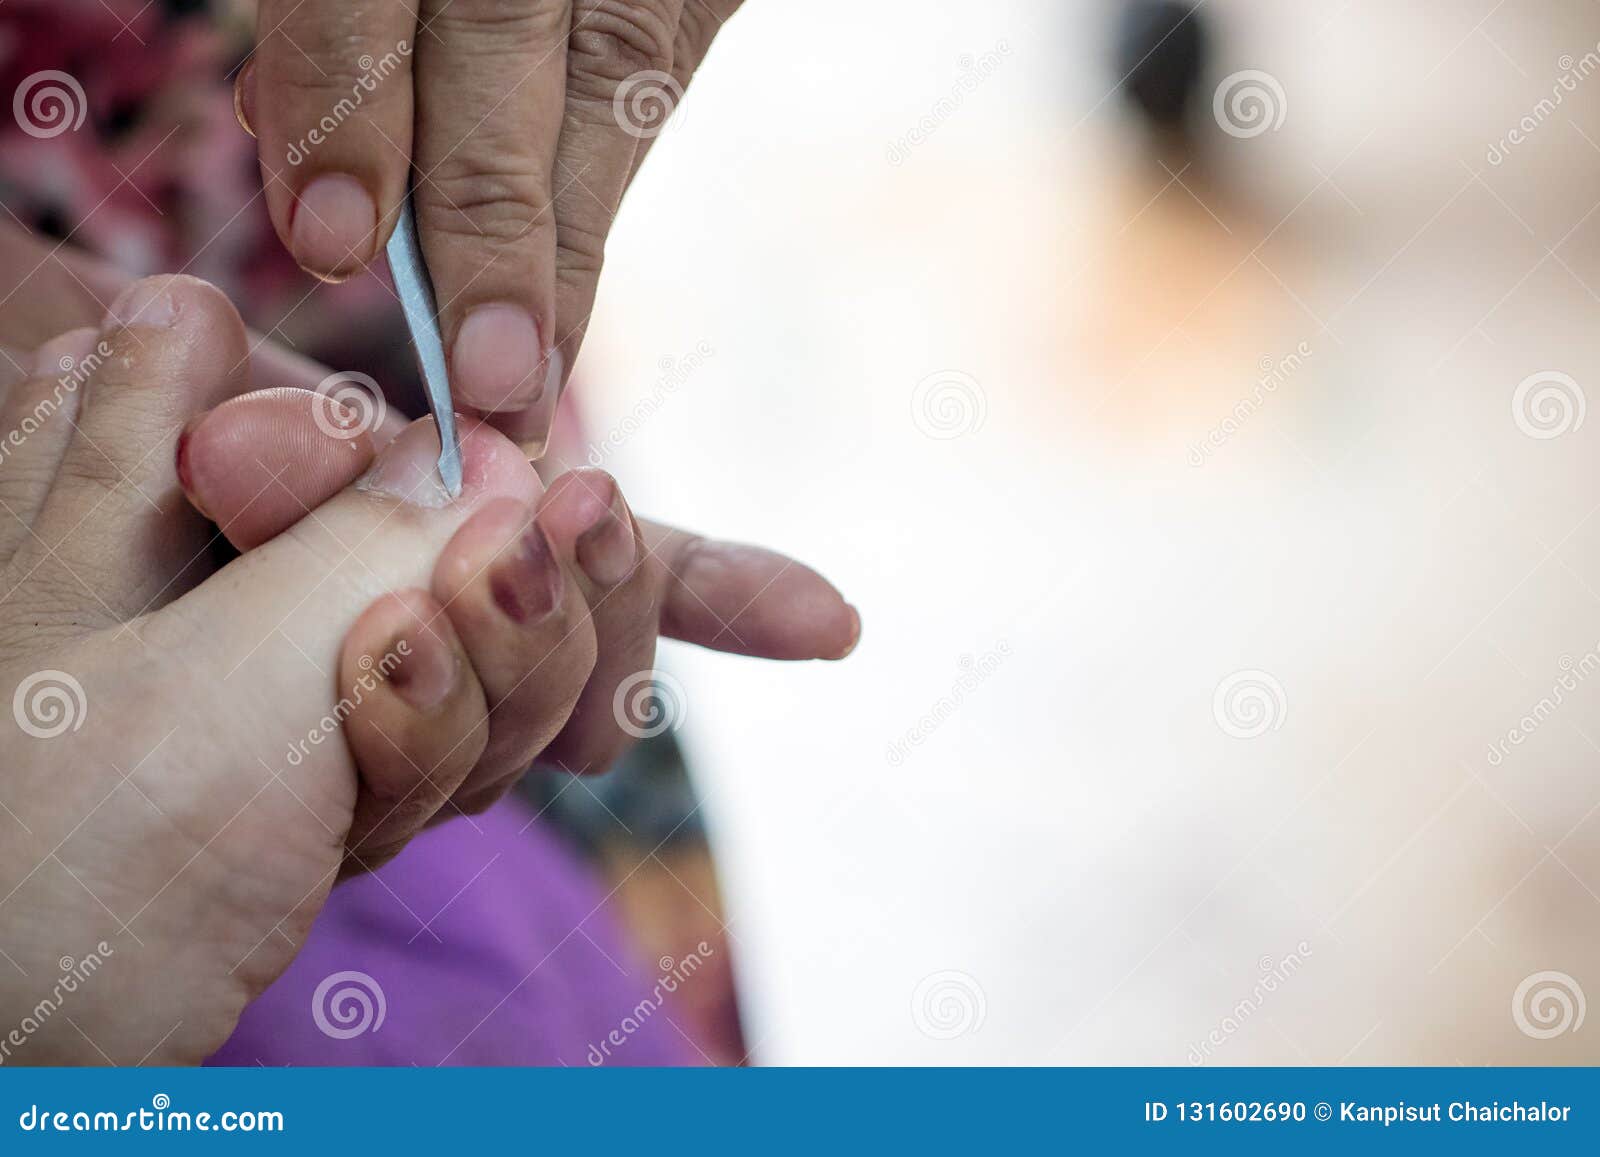 Premium Photo | The manicurist removes the base coat from the nail with an  orange stick during the manicure procedure at the spa